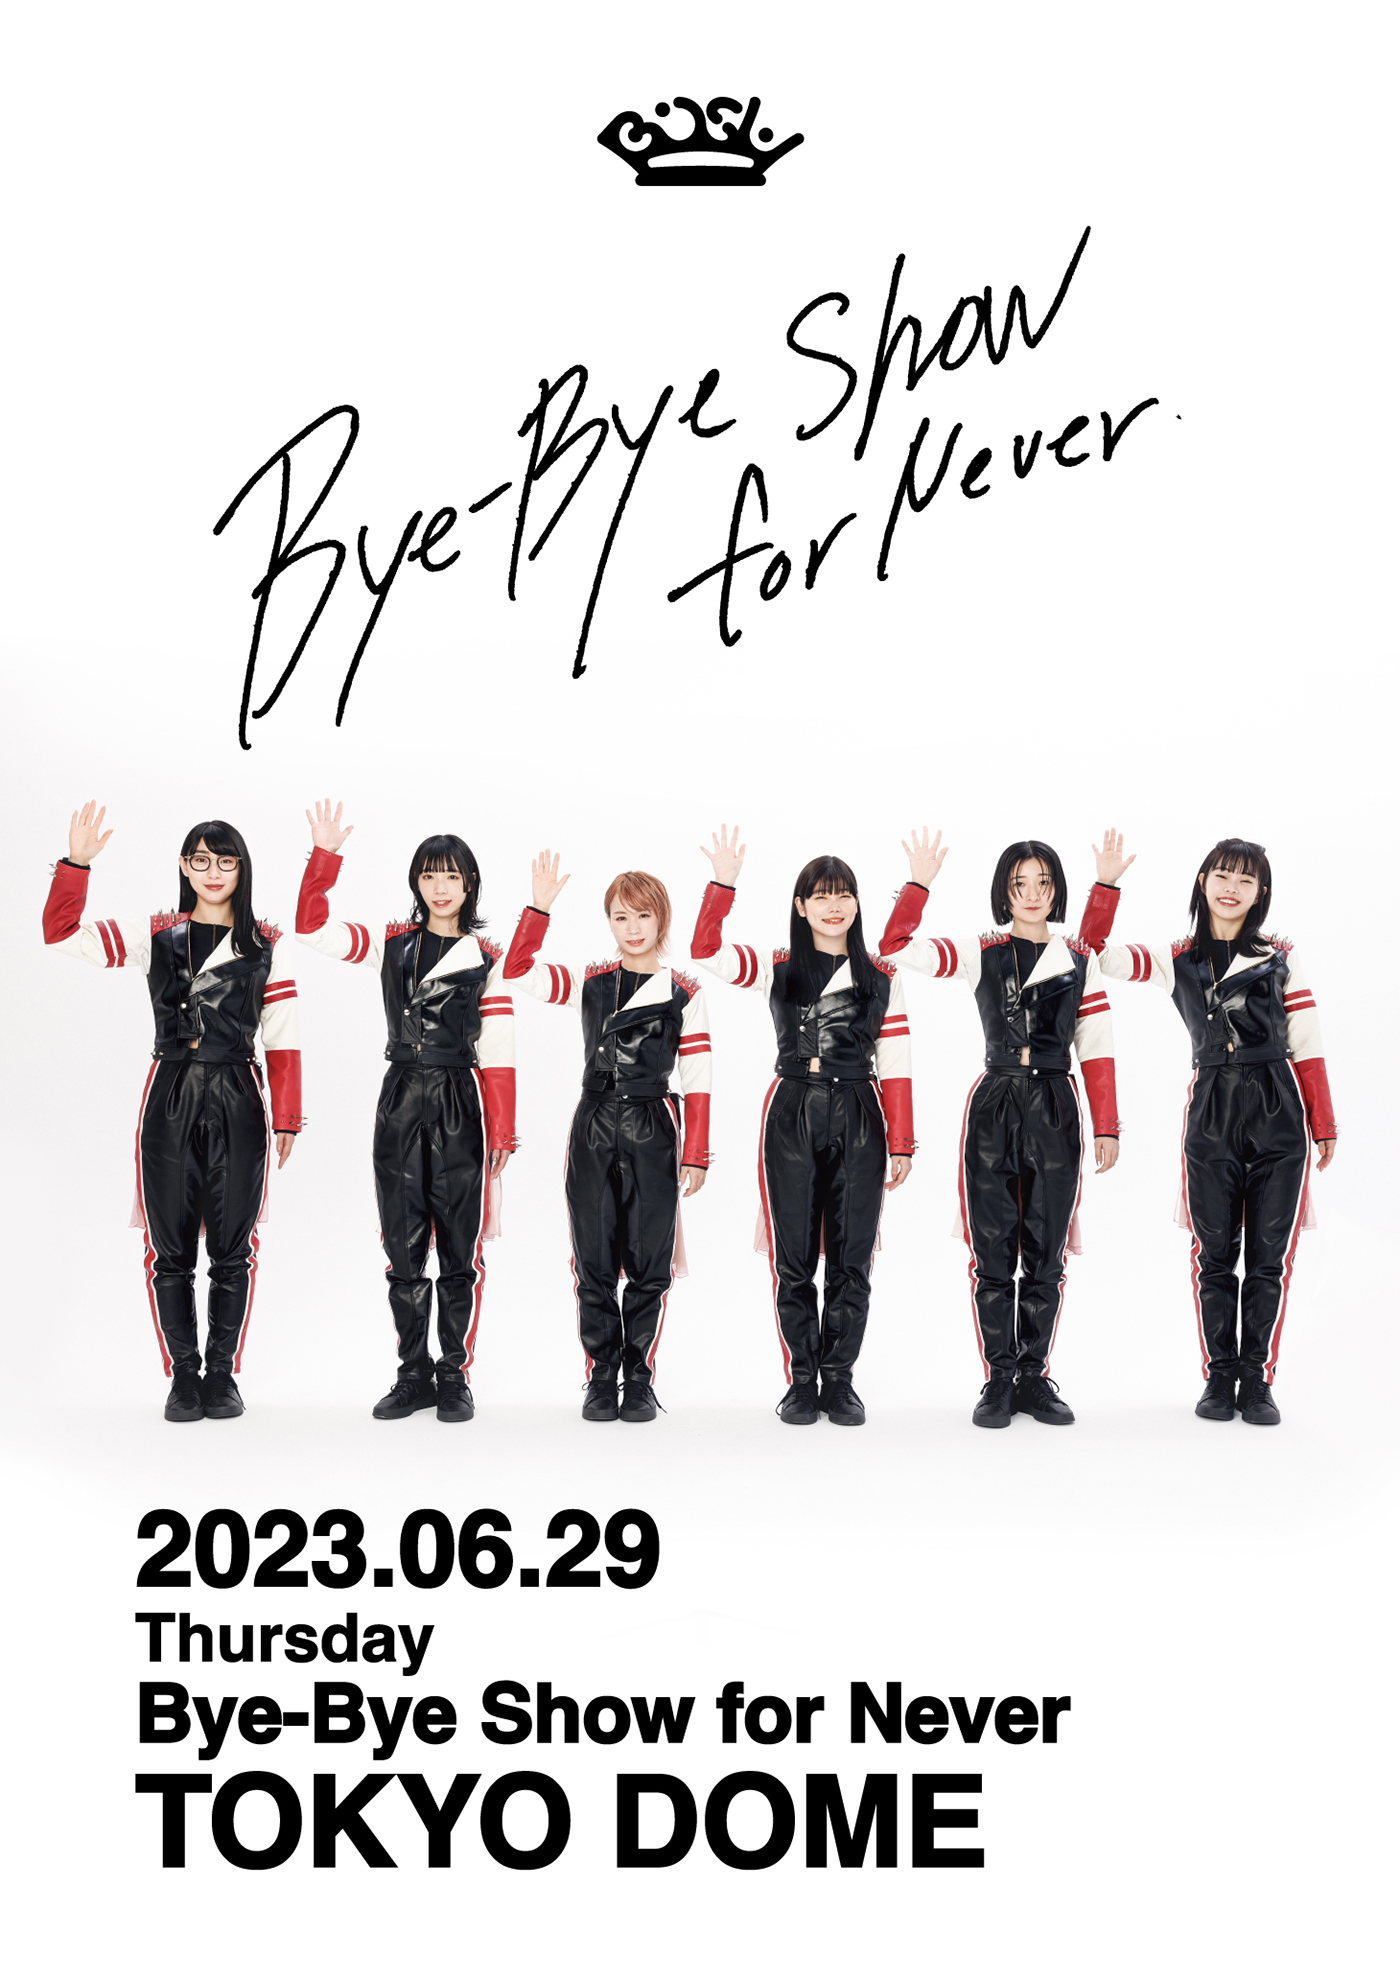 BiSH、解散ライブ『Bye-Bye Show for Never at TOKYO DOME』の映像作品化が決定 - 画像一覧（2/2）